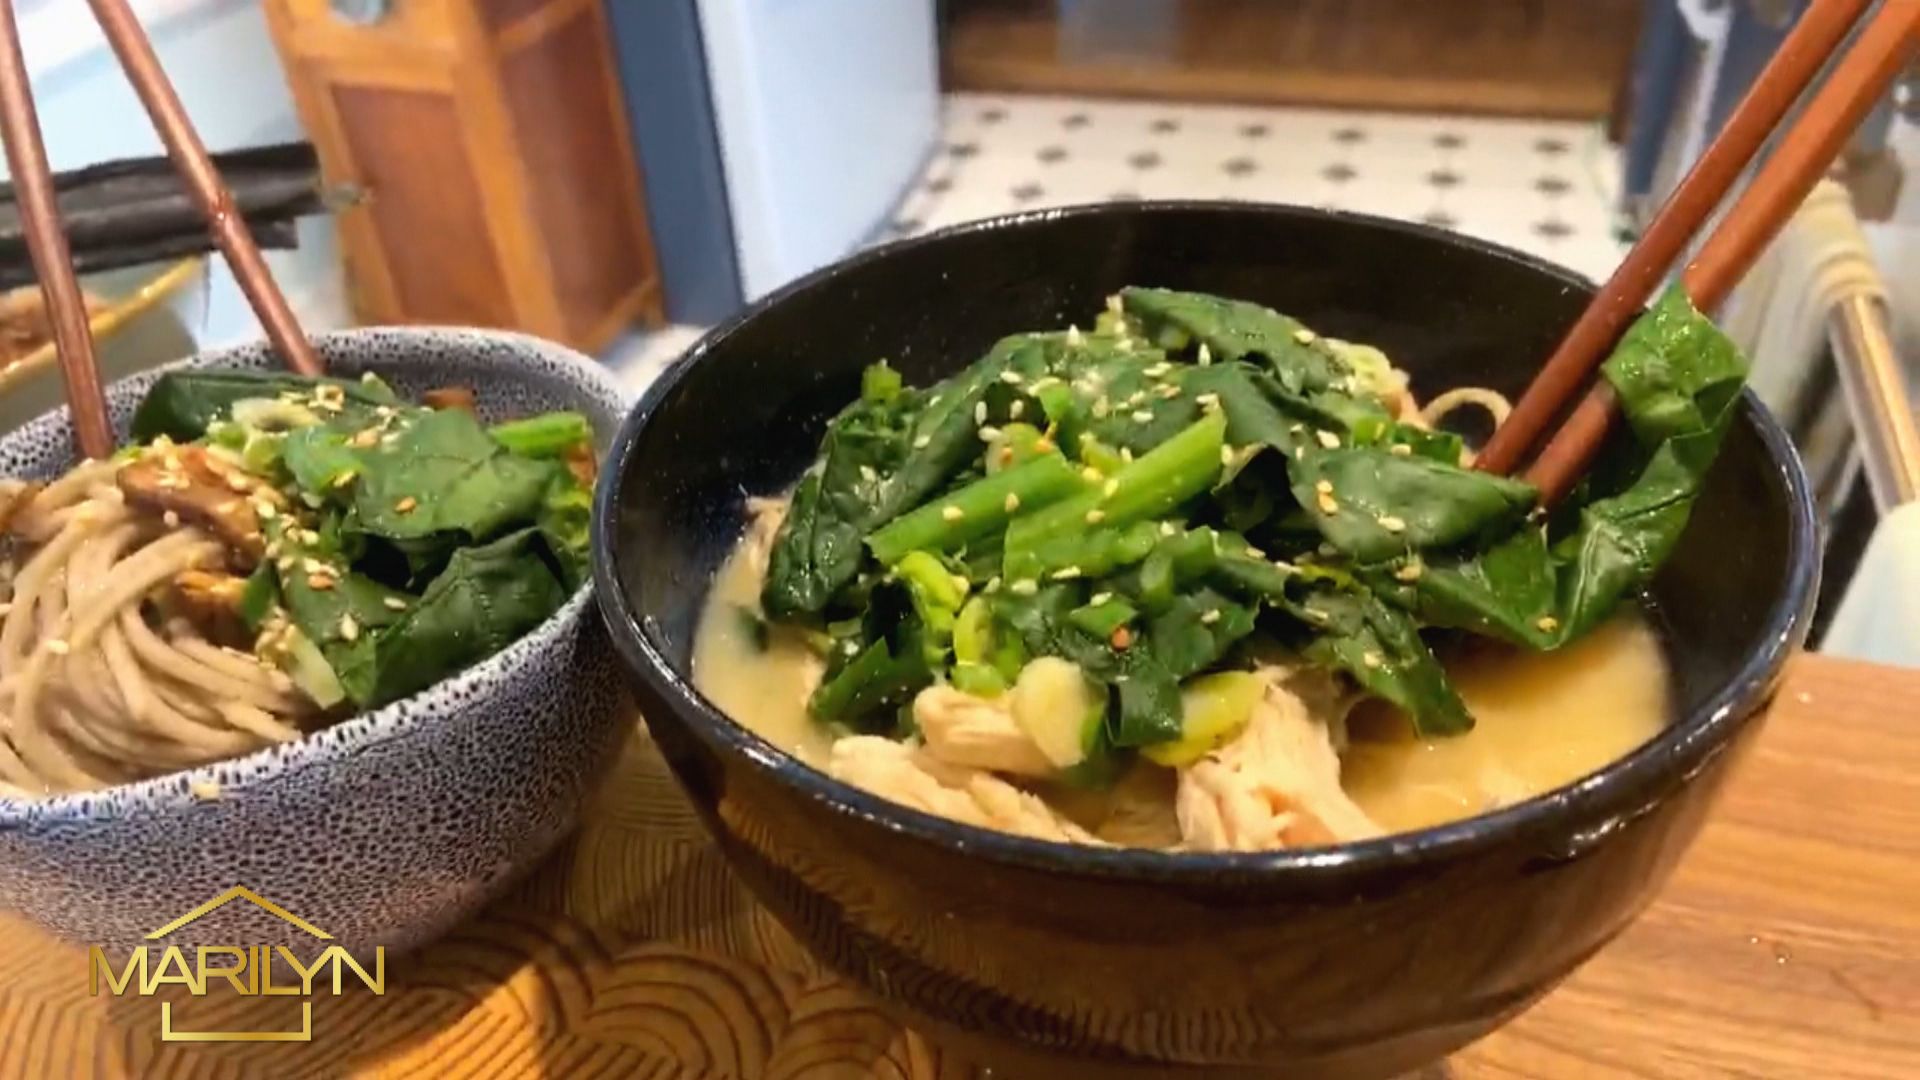 Ginger miso soup with greens and soba noodles